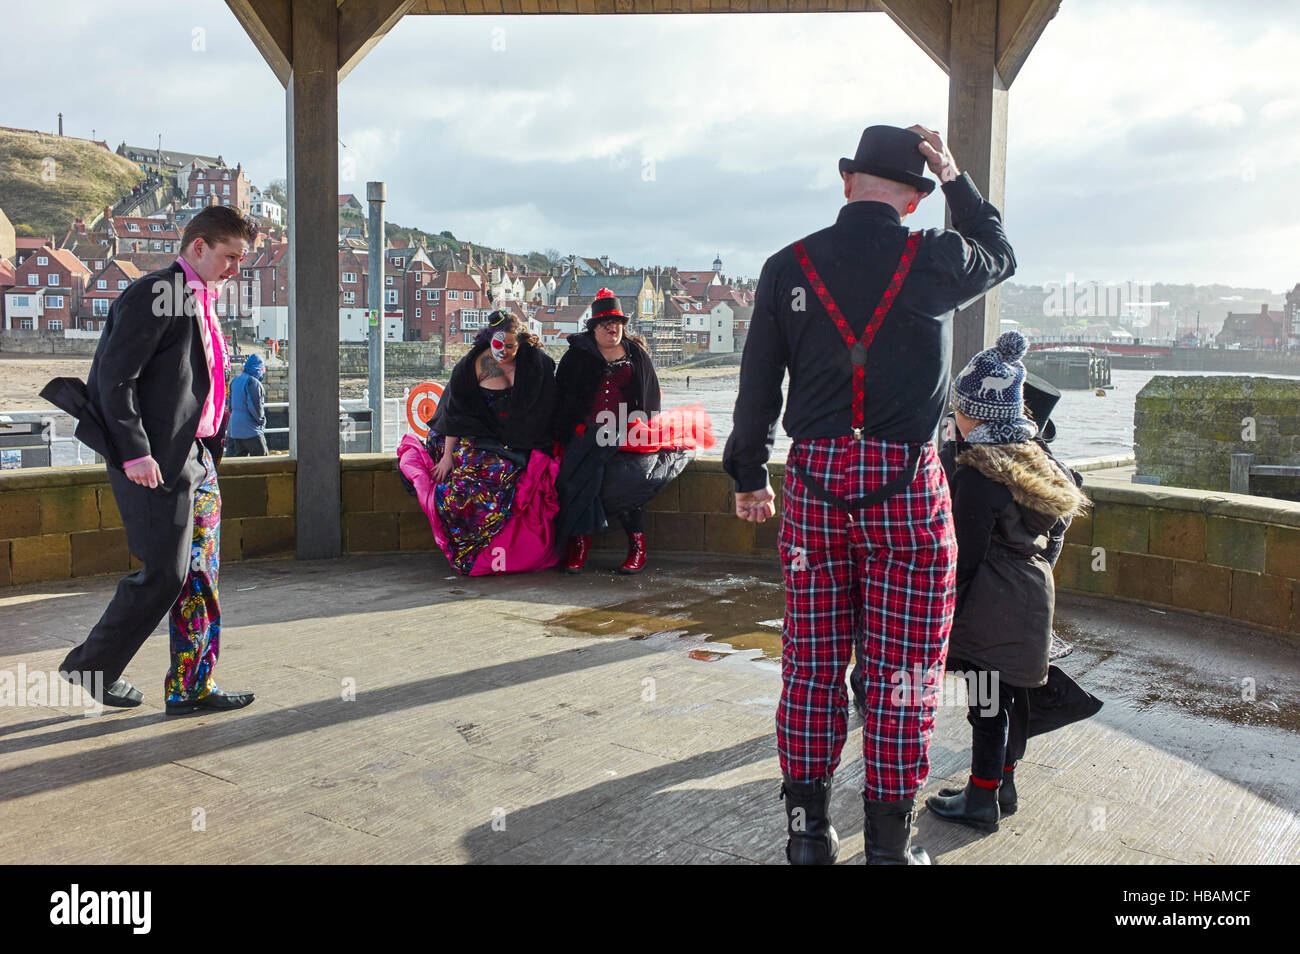 Steampunk ladies pose in Whitby during goth weekend Stock Photo